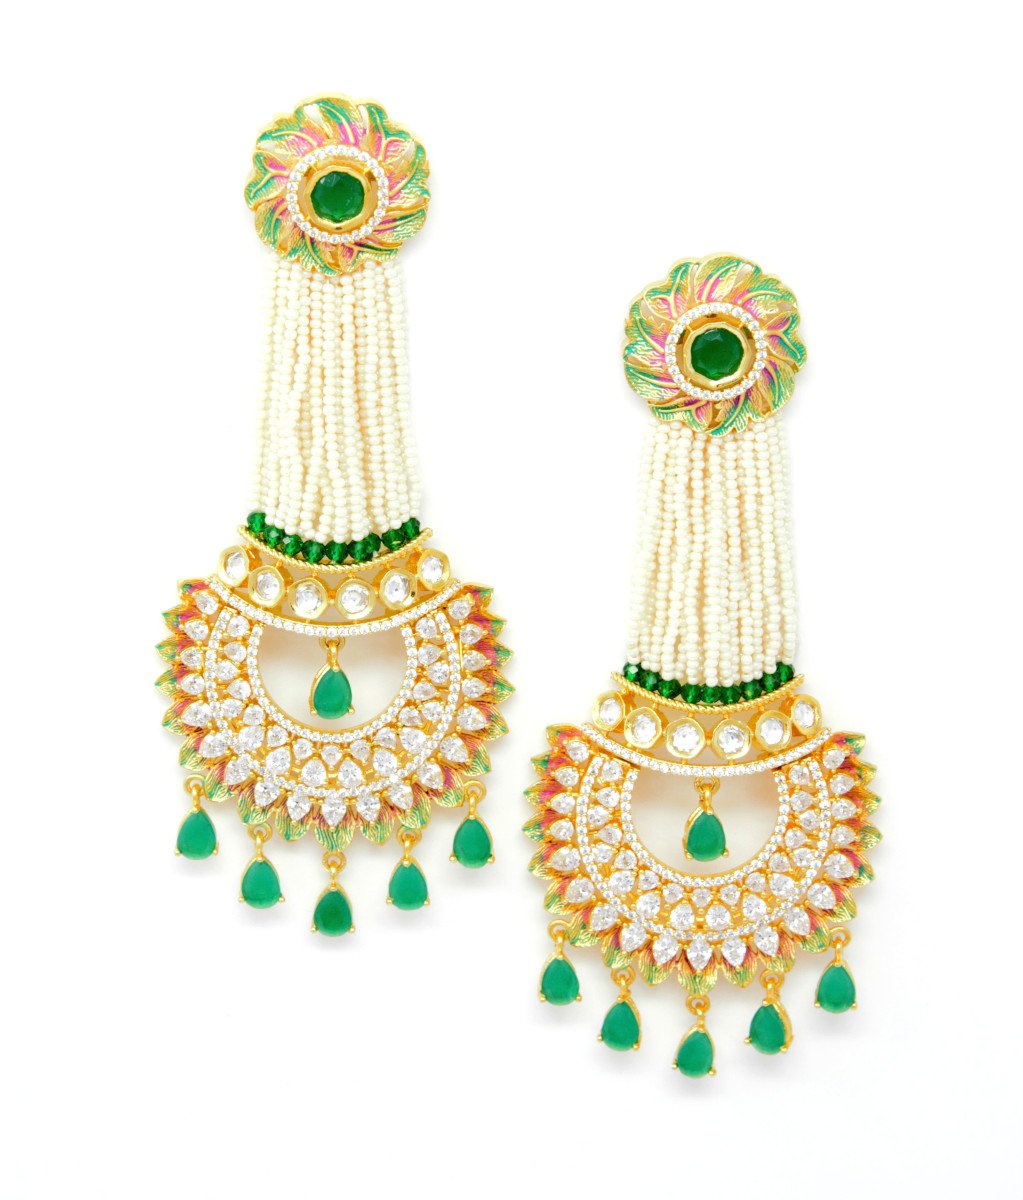 Gold Dangling Chandbali With Multi Layer Beads and Embedded Green and White Stones